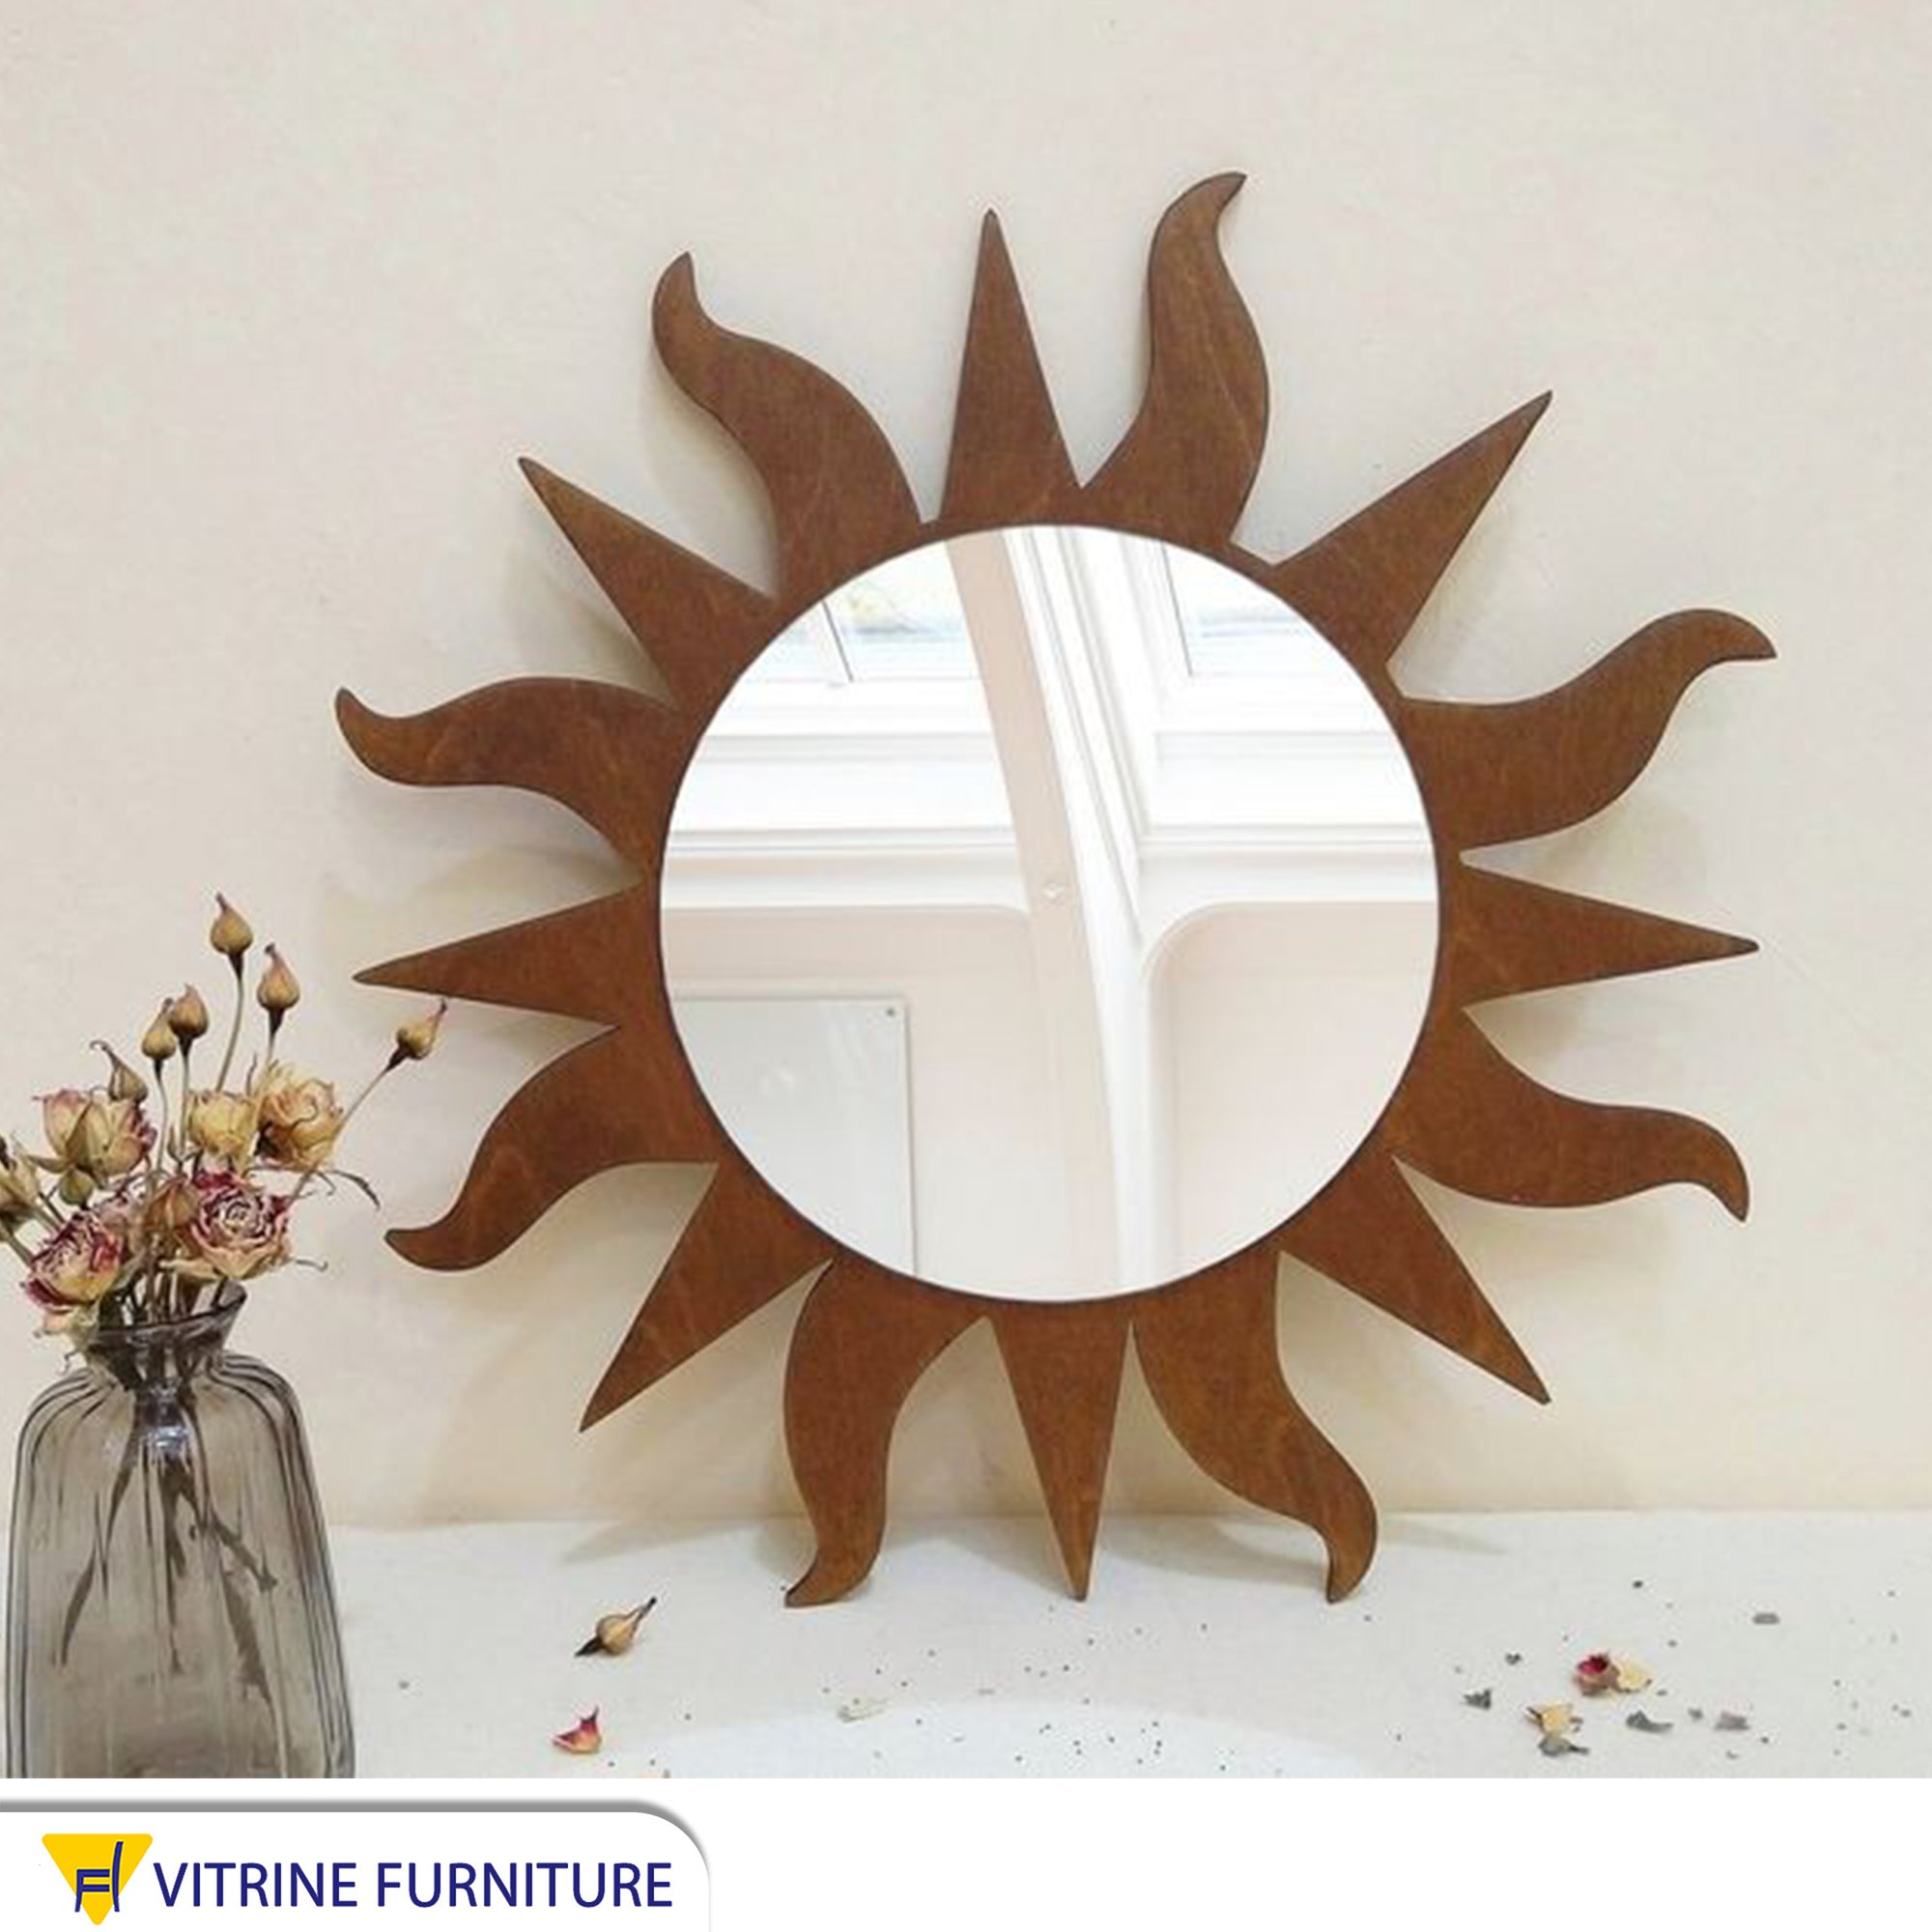 Mirrors with a brown frame in the shape of the sun